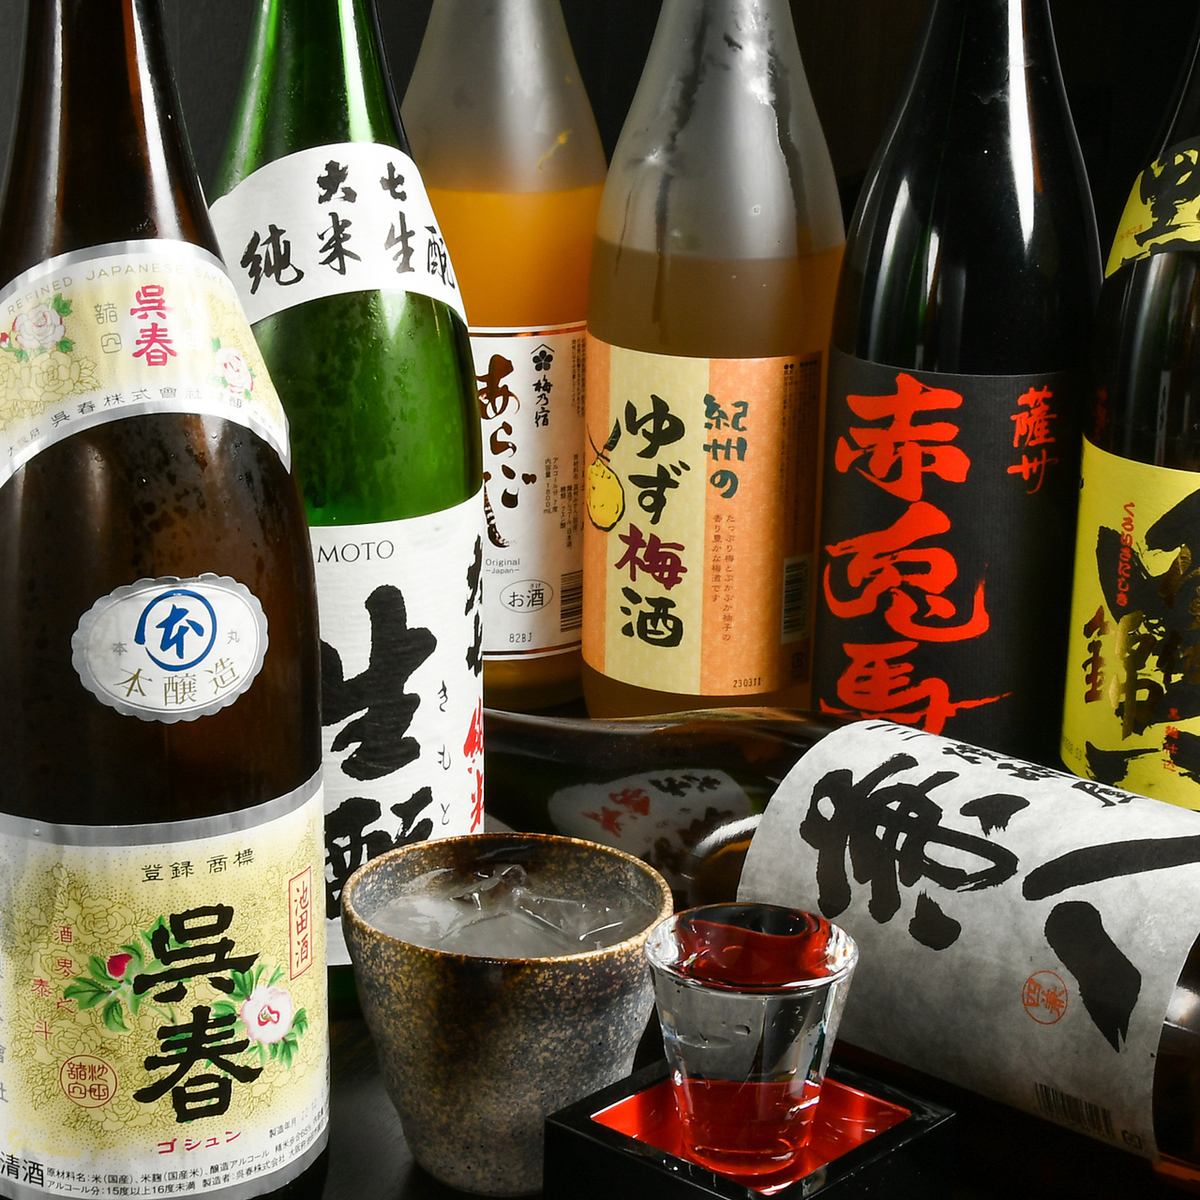 All-you-can-drink available from 980 yen!